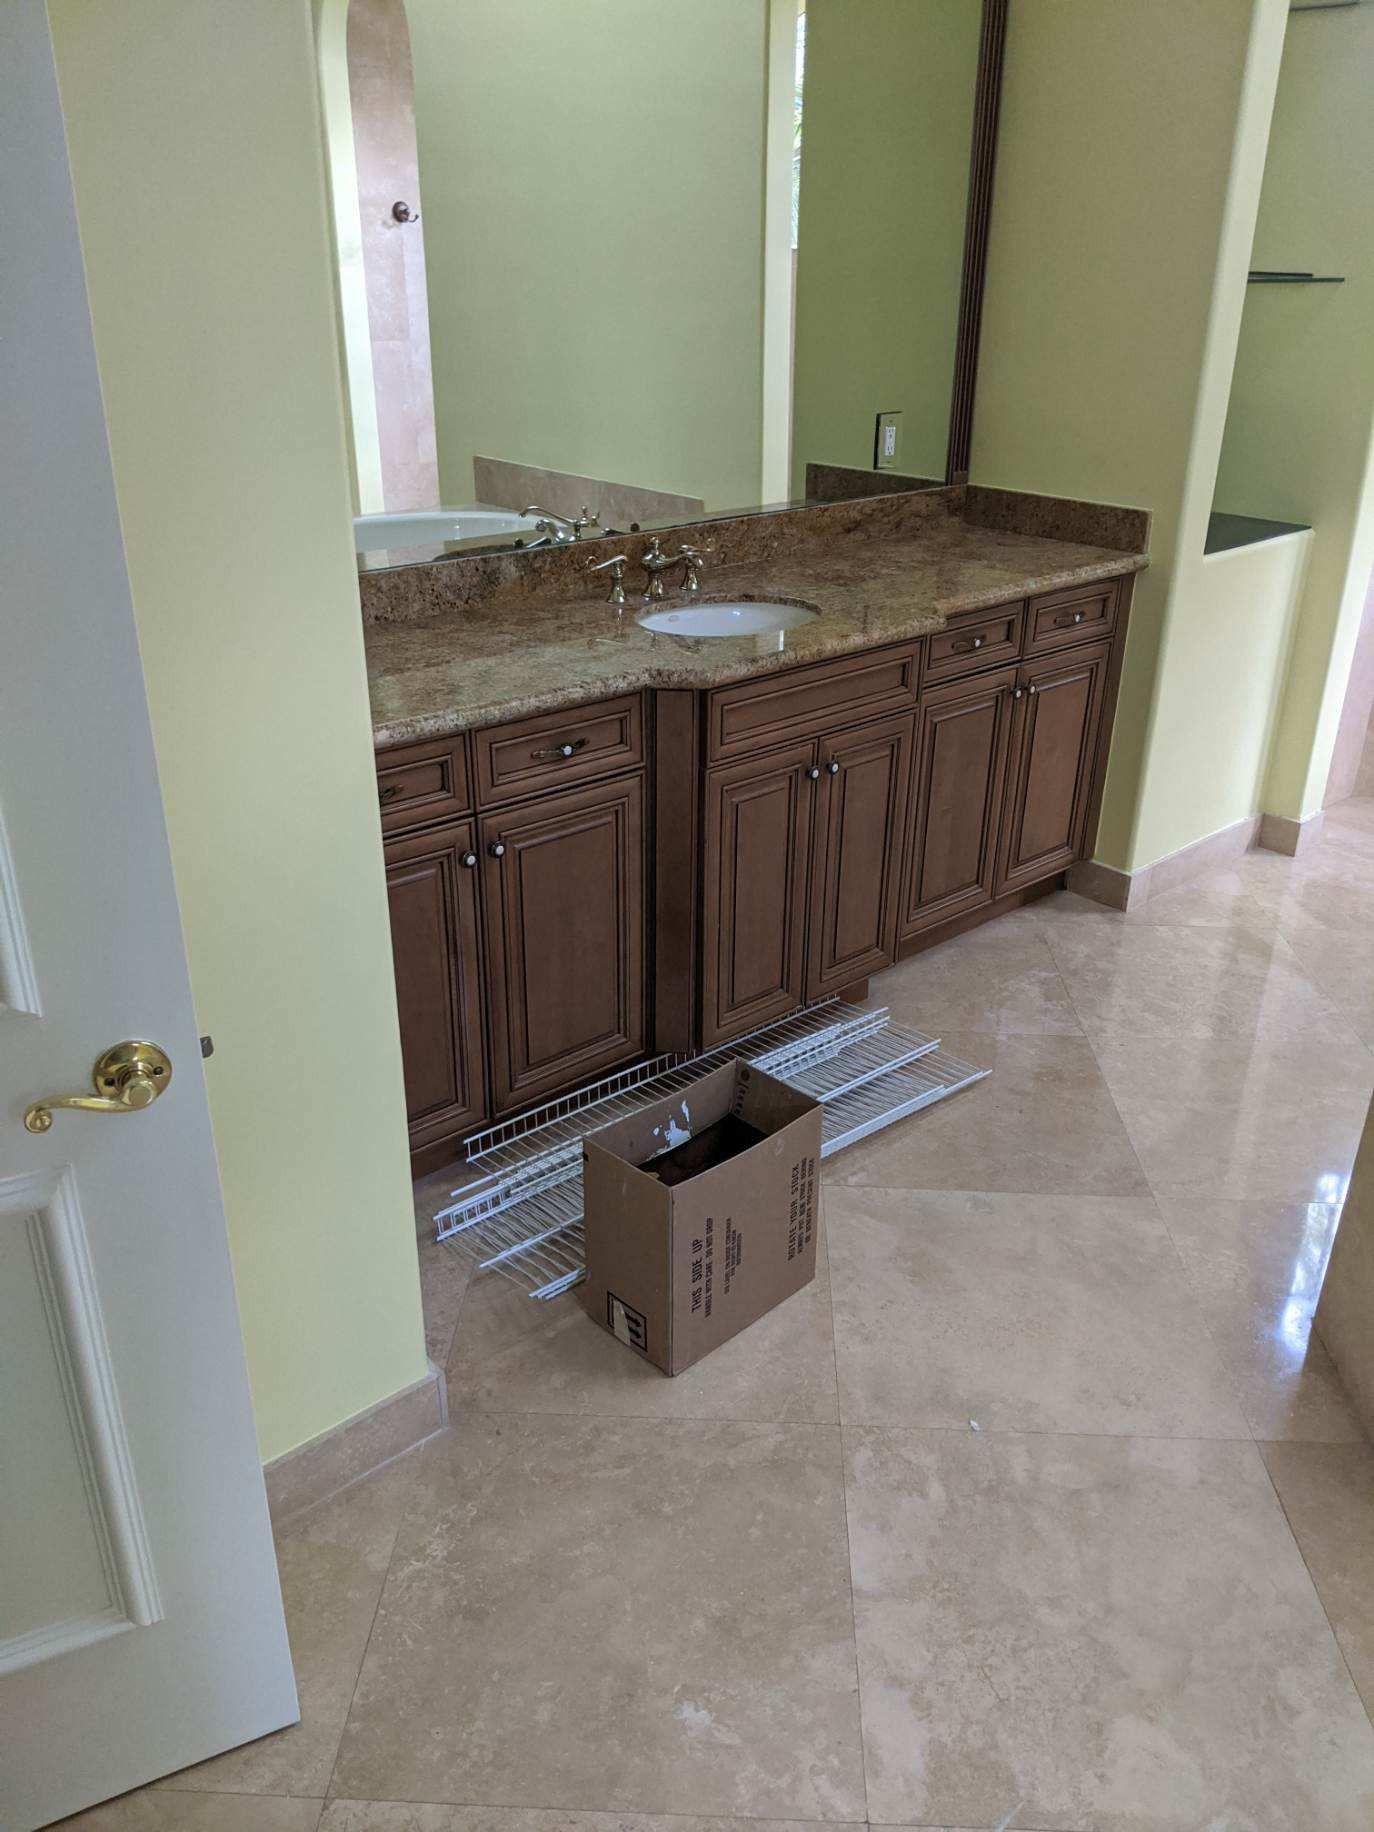 Kitchen cabinets for sale